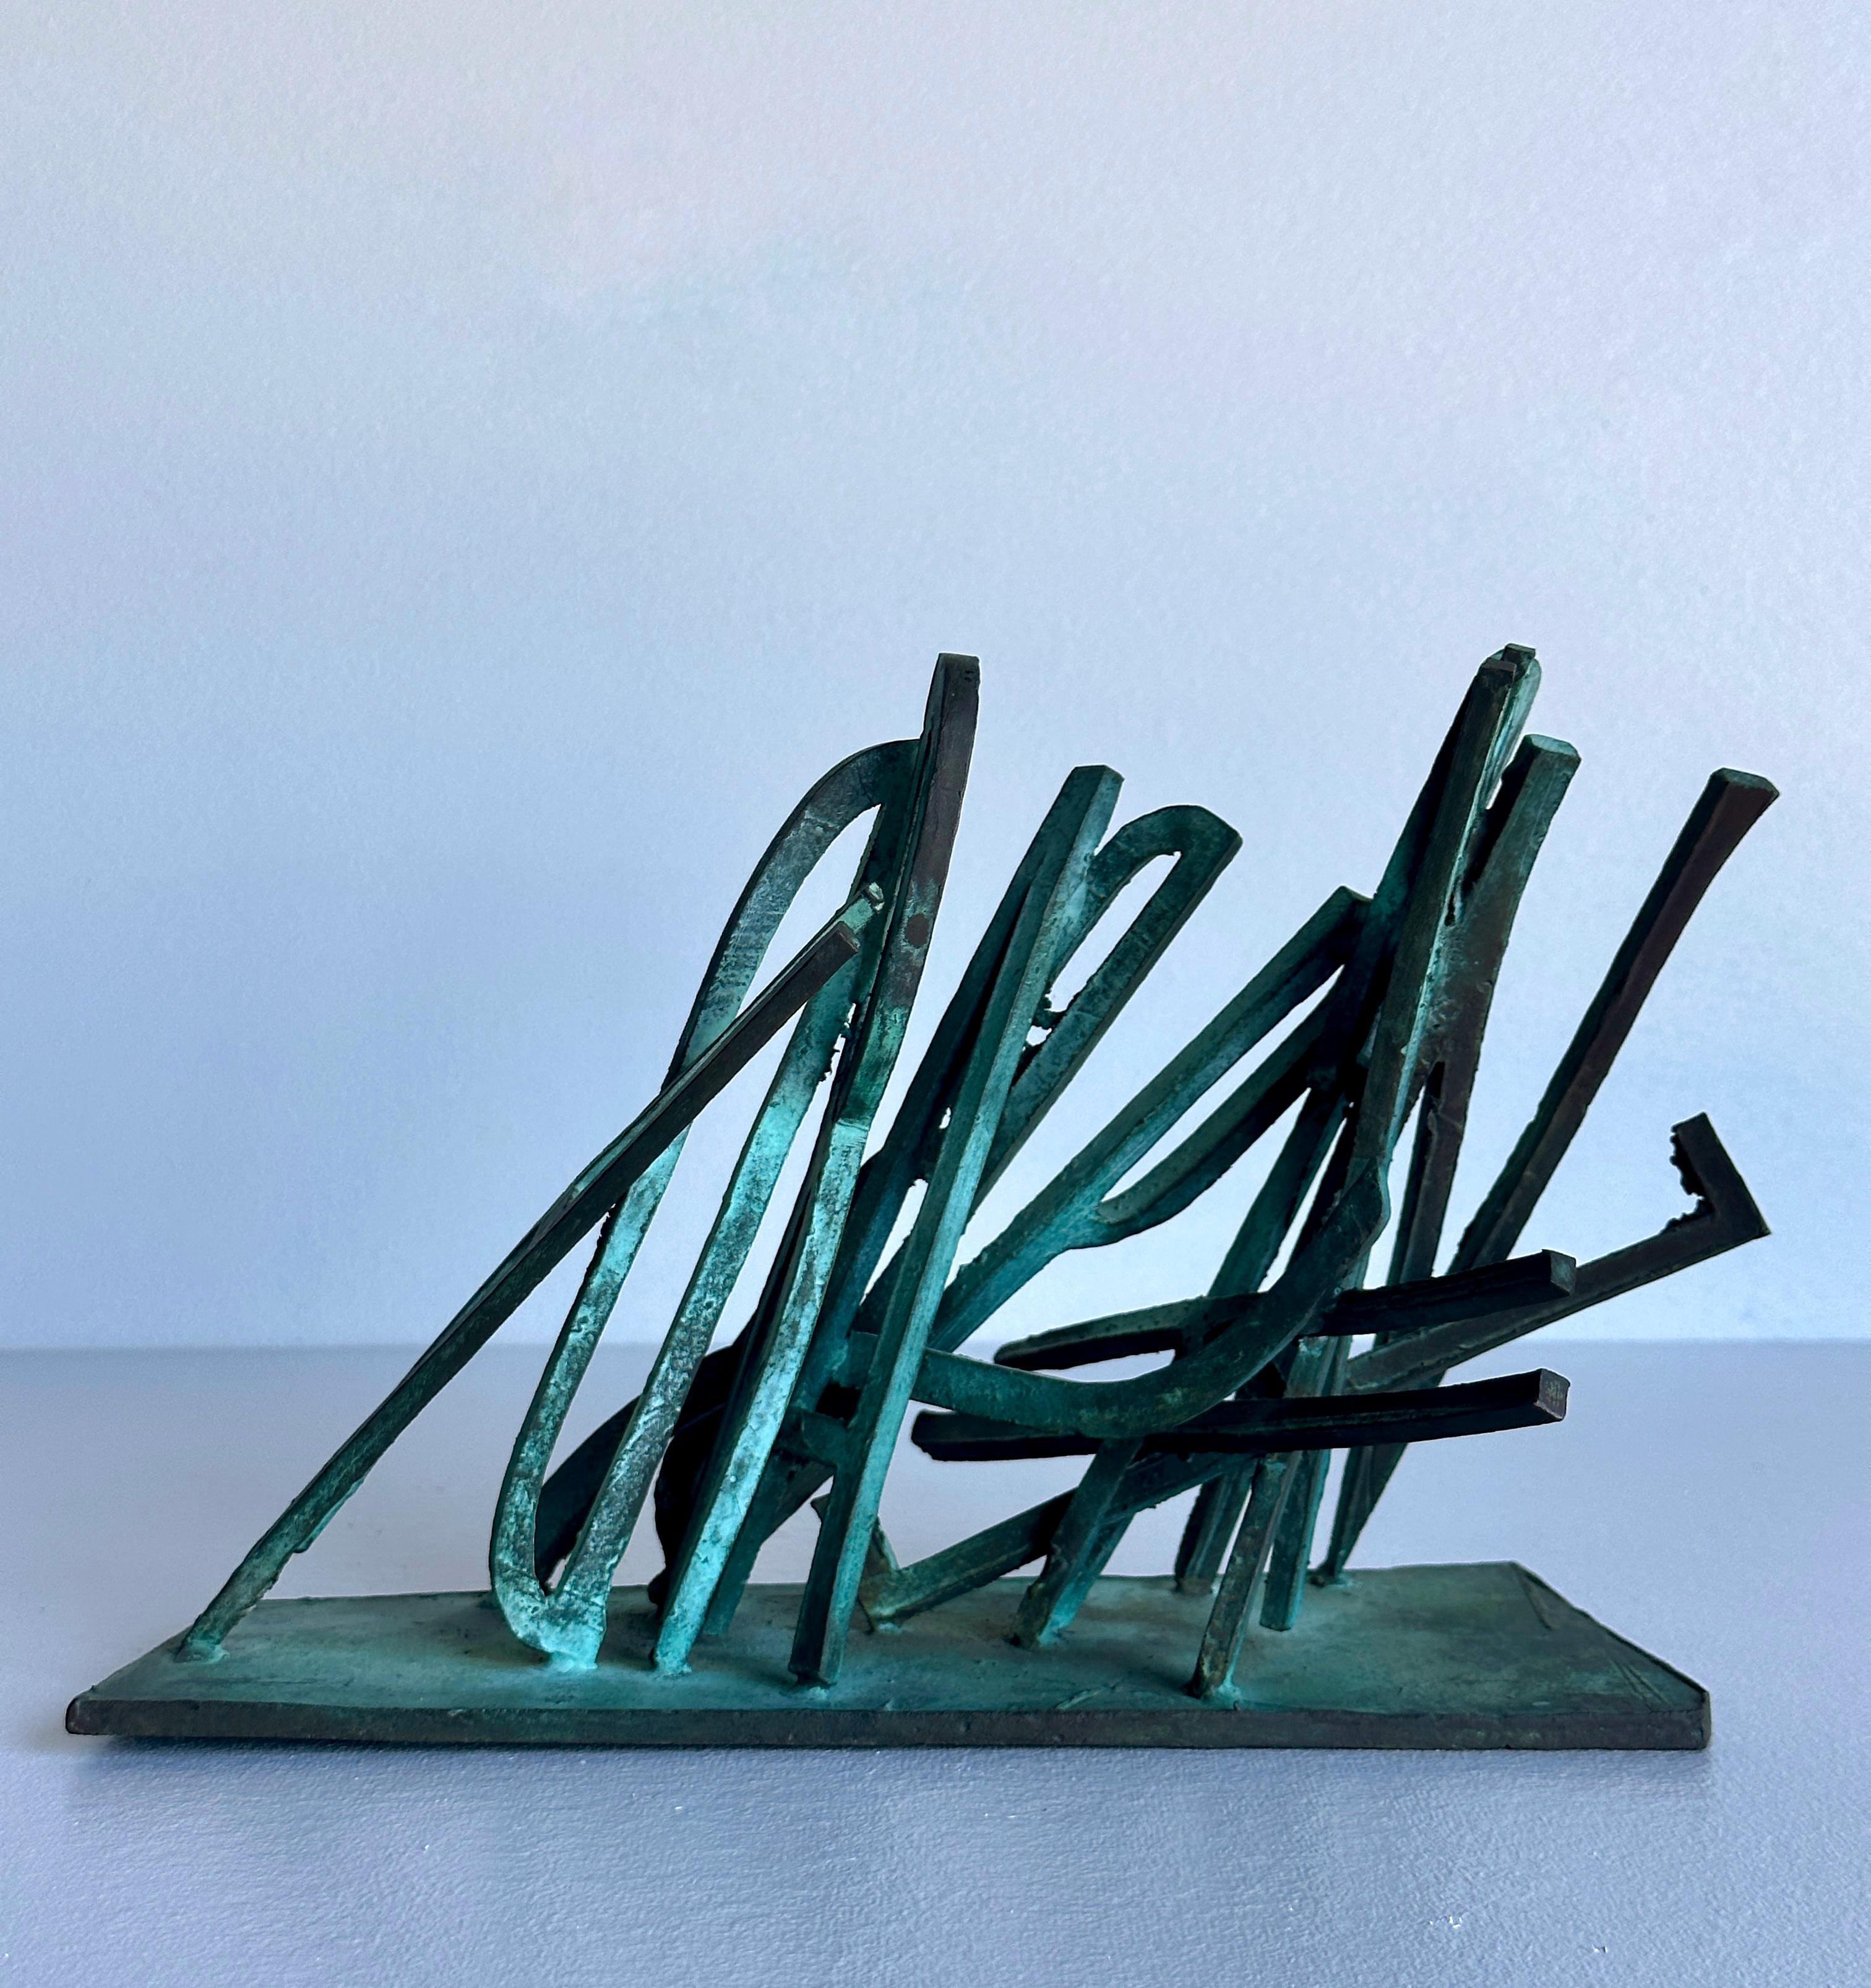 This bronze “leaning alphabet” sculpture is signed by the artist, who was known by his given name but also went by an assumed name; he called himself Sharbek Almajkov. We acquired this quirky piece from a former gallery owner in the Berkshires who